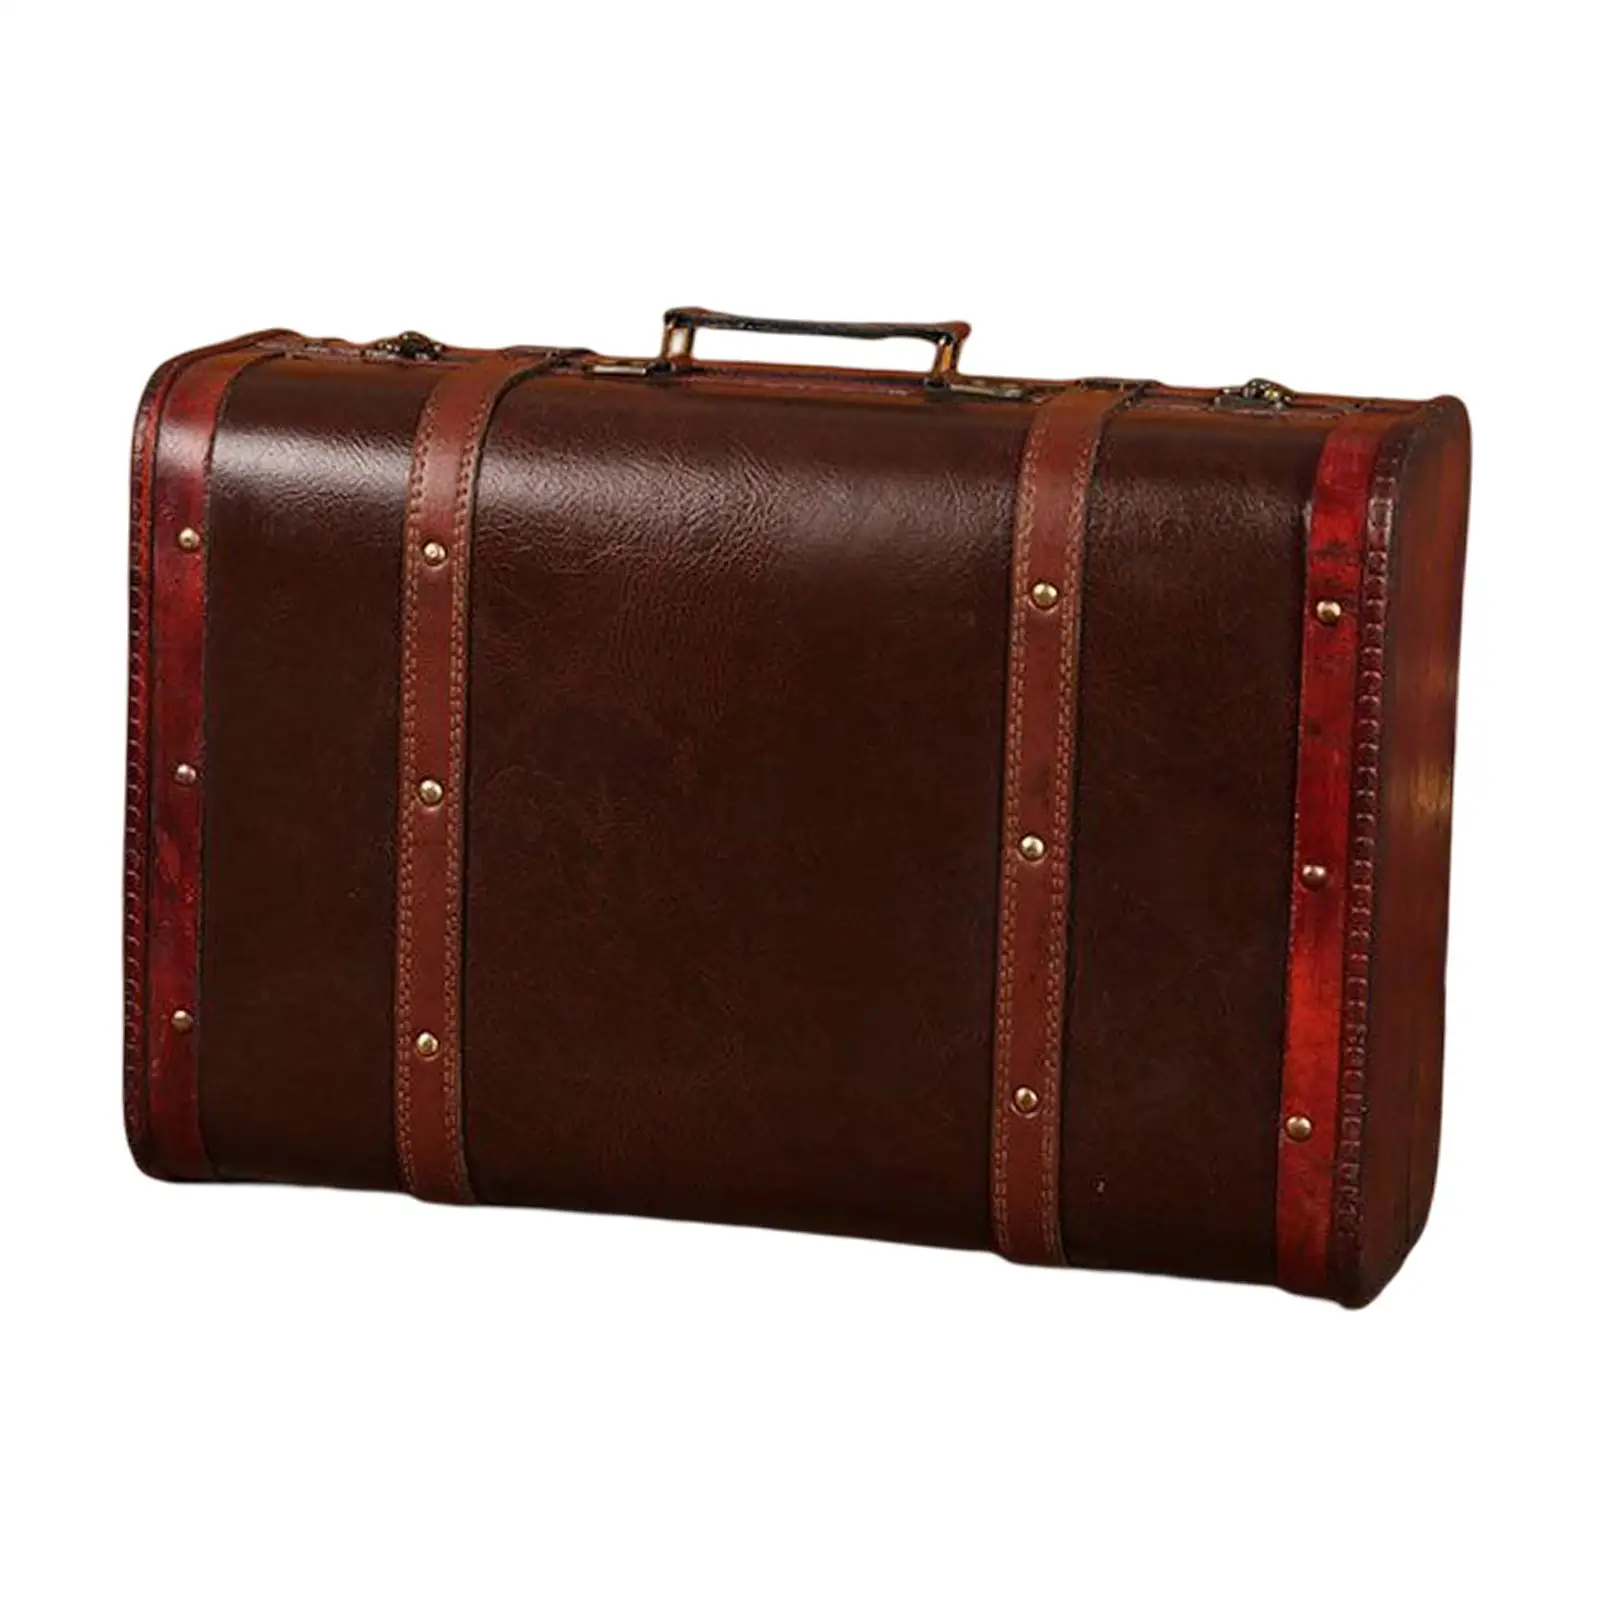 Vintage Suitcase with Handle Portable Wooden Treasure Chests for Shop Window